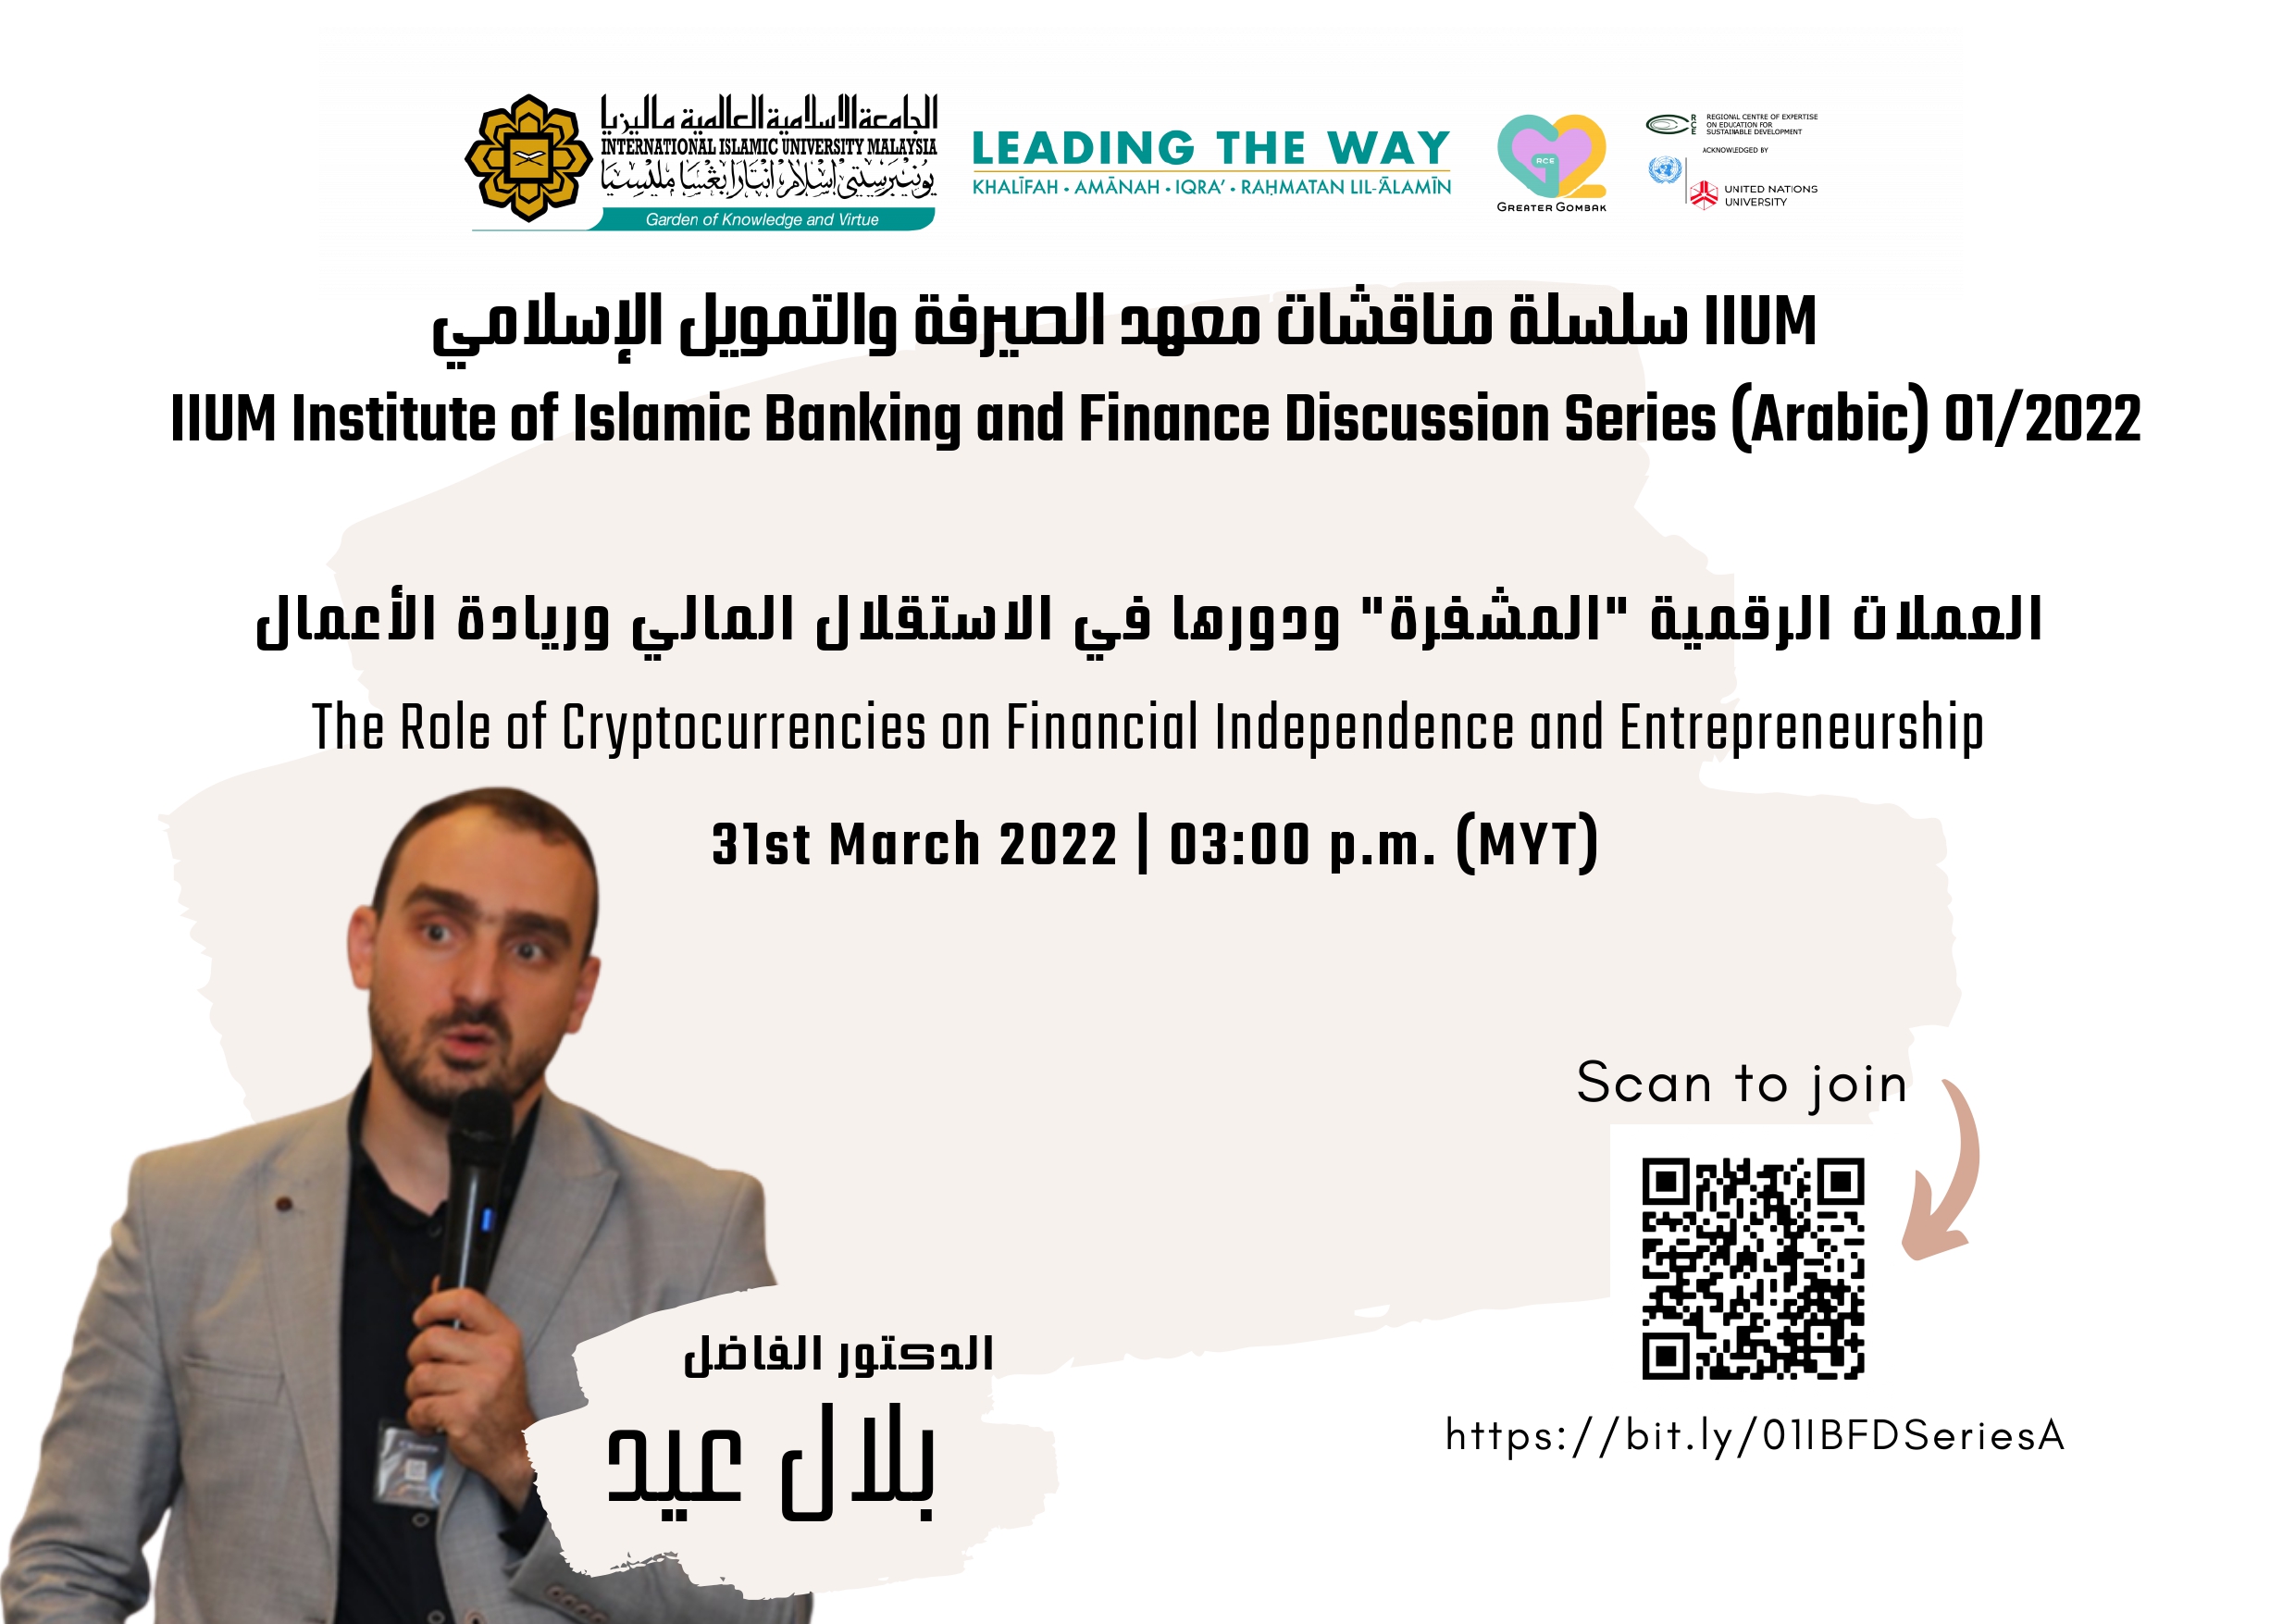 IIUM Institute of Islamic Banking and Finance Discussion Series (Arabic) 01/2022